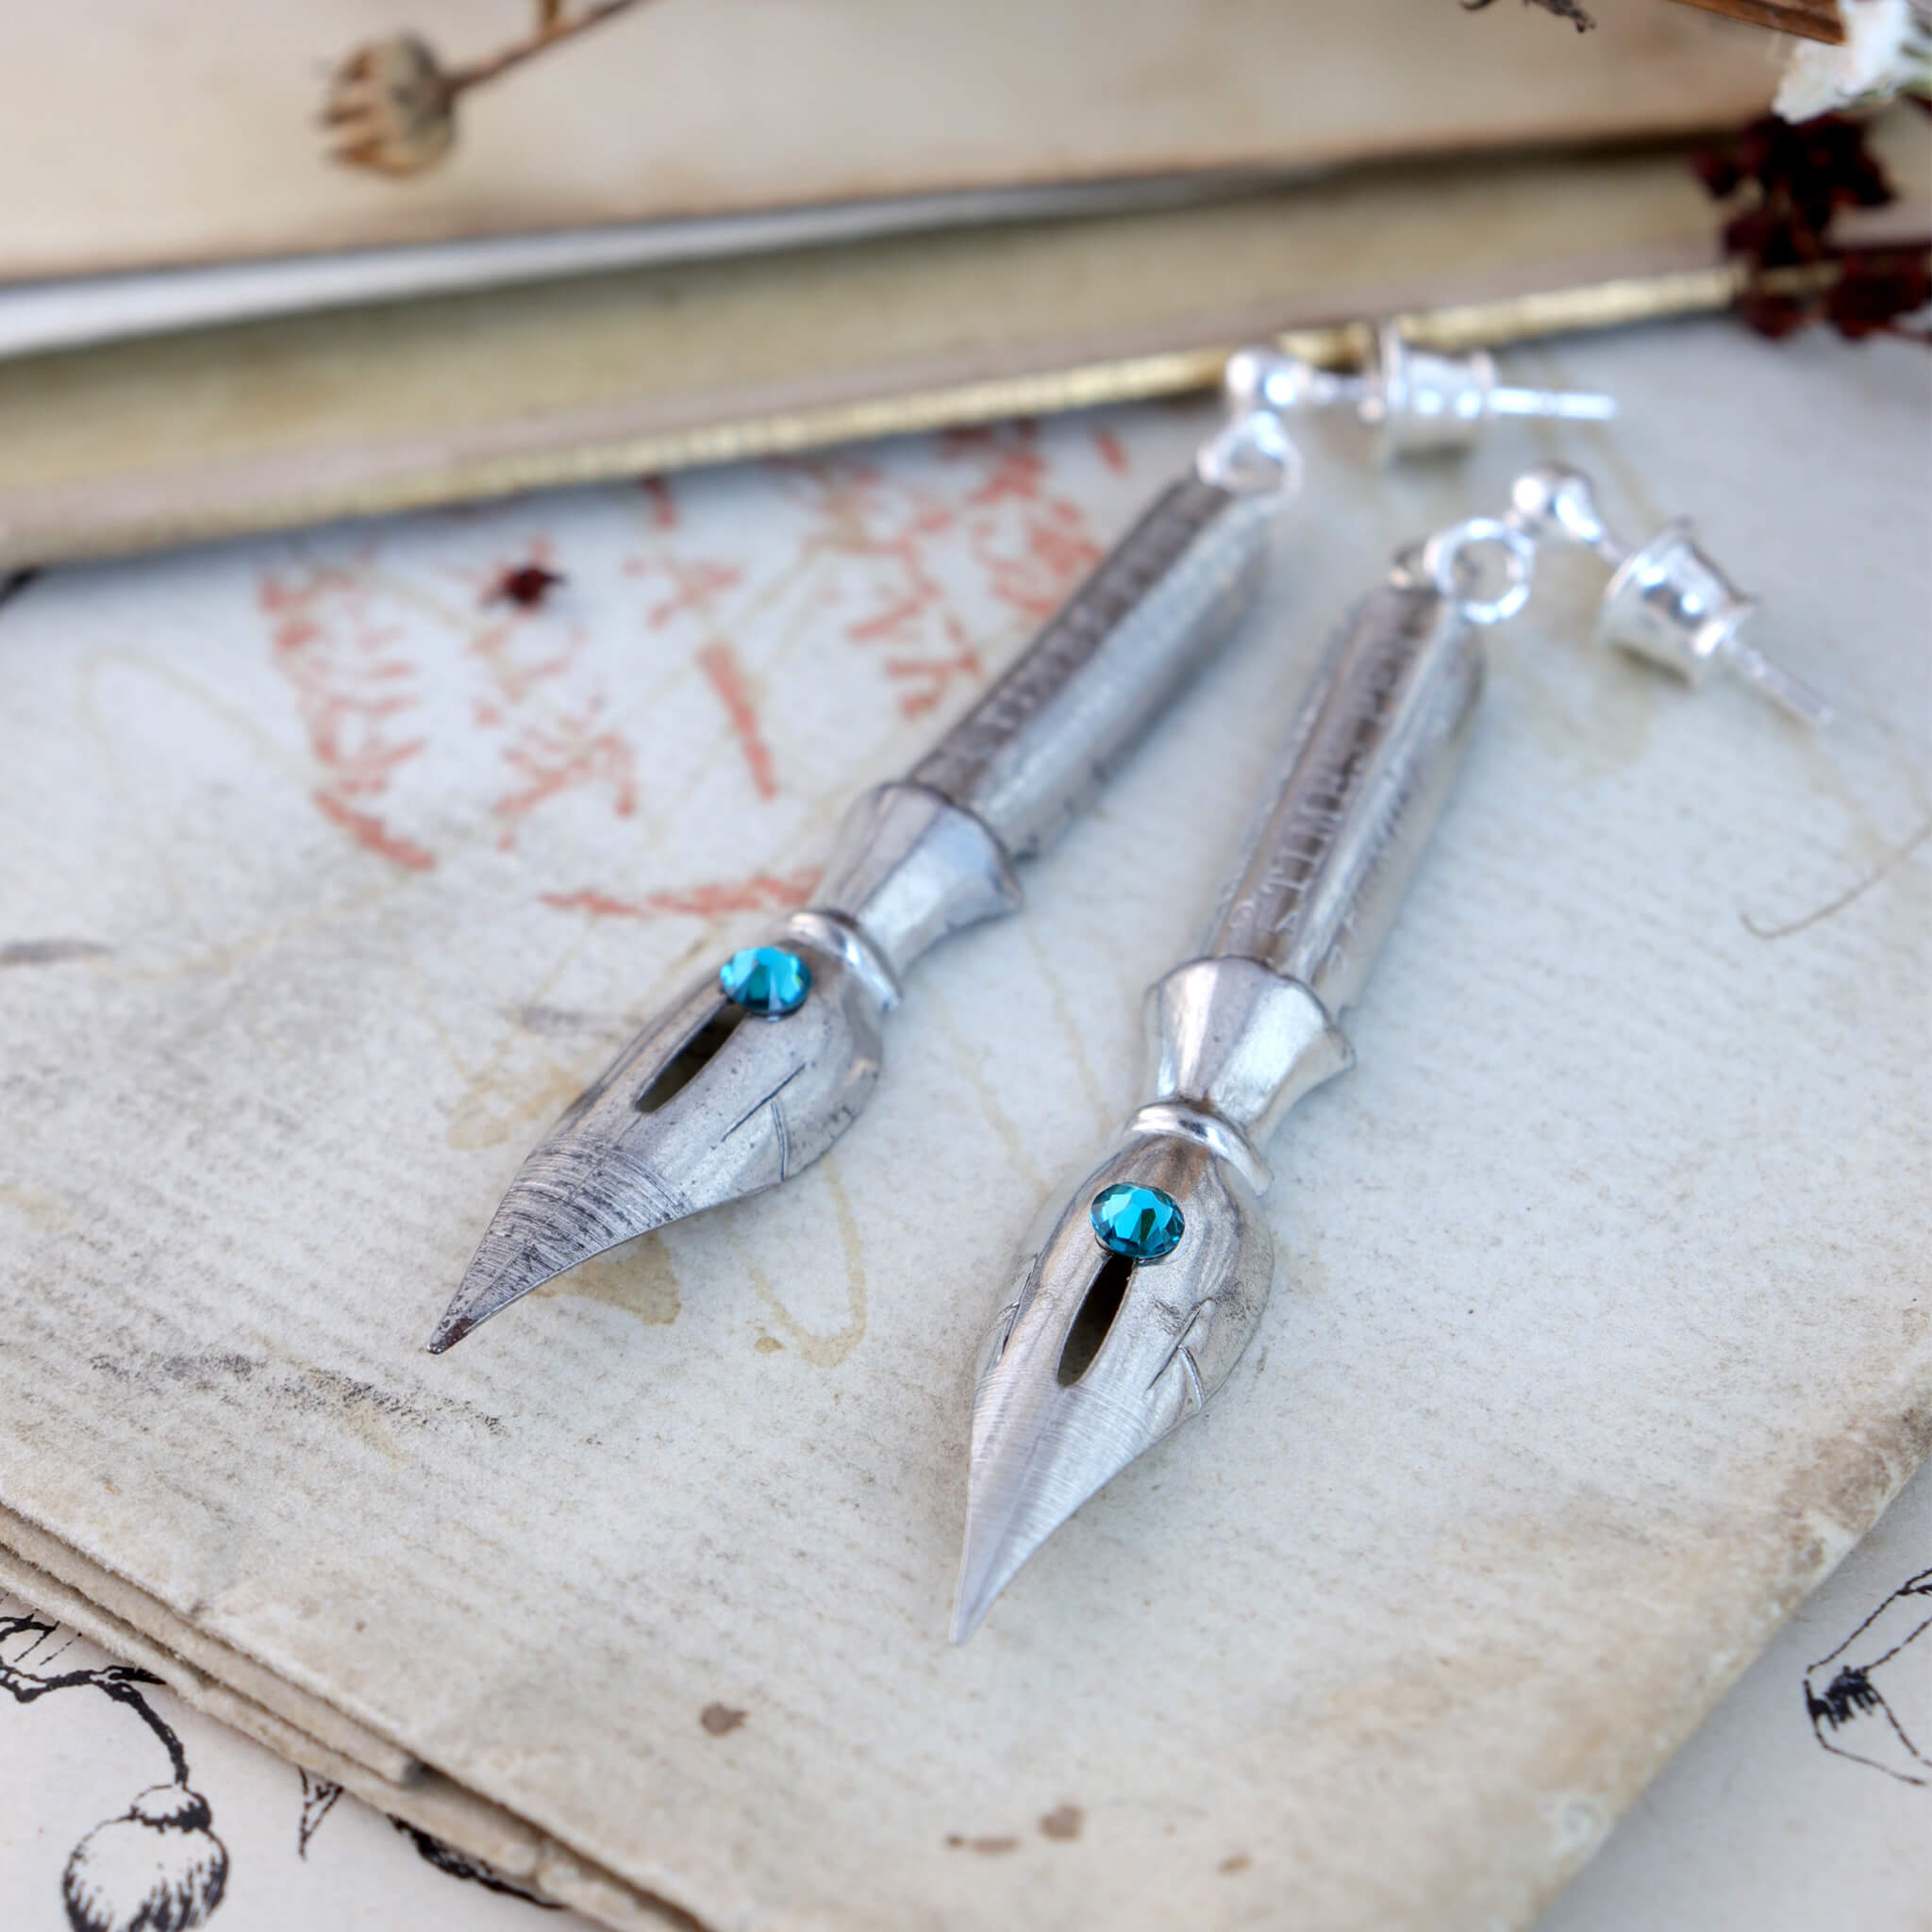 pen nib earrings with blue zircon birthstone crystals on them lying on vintage paper